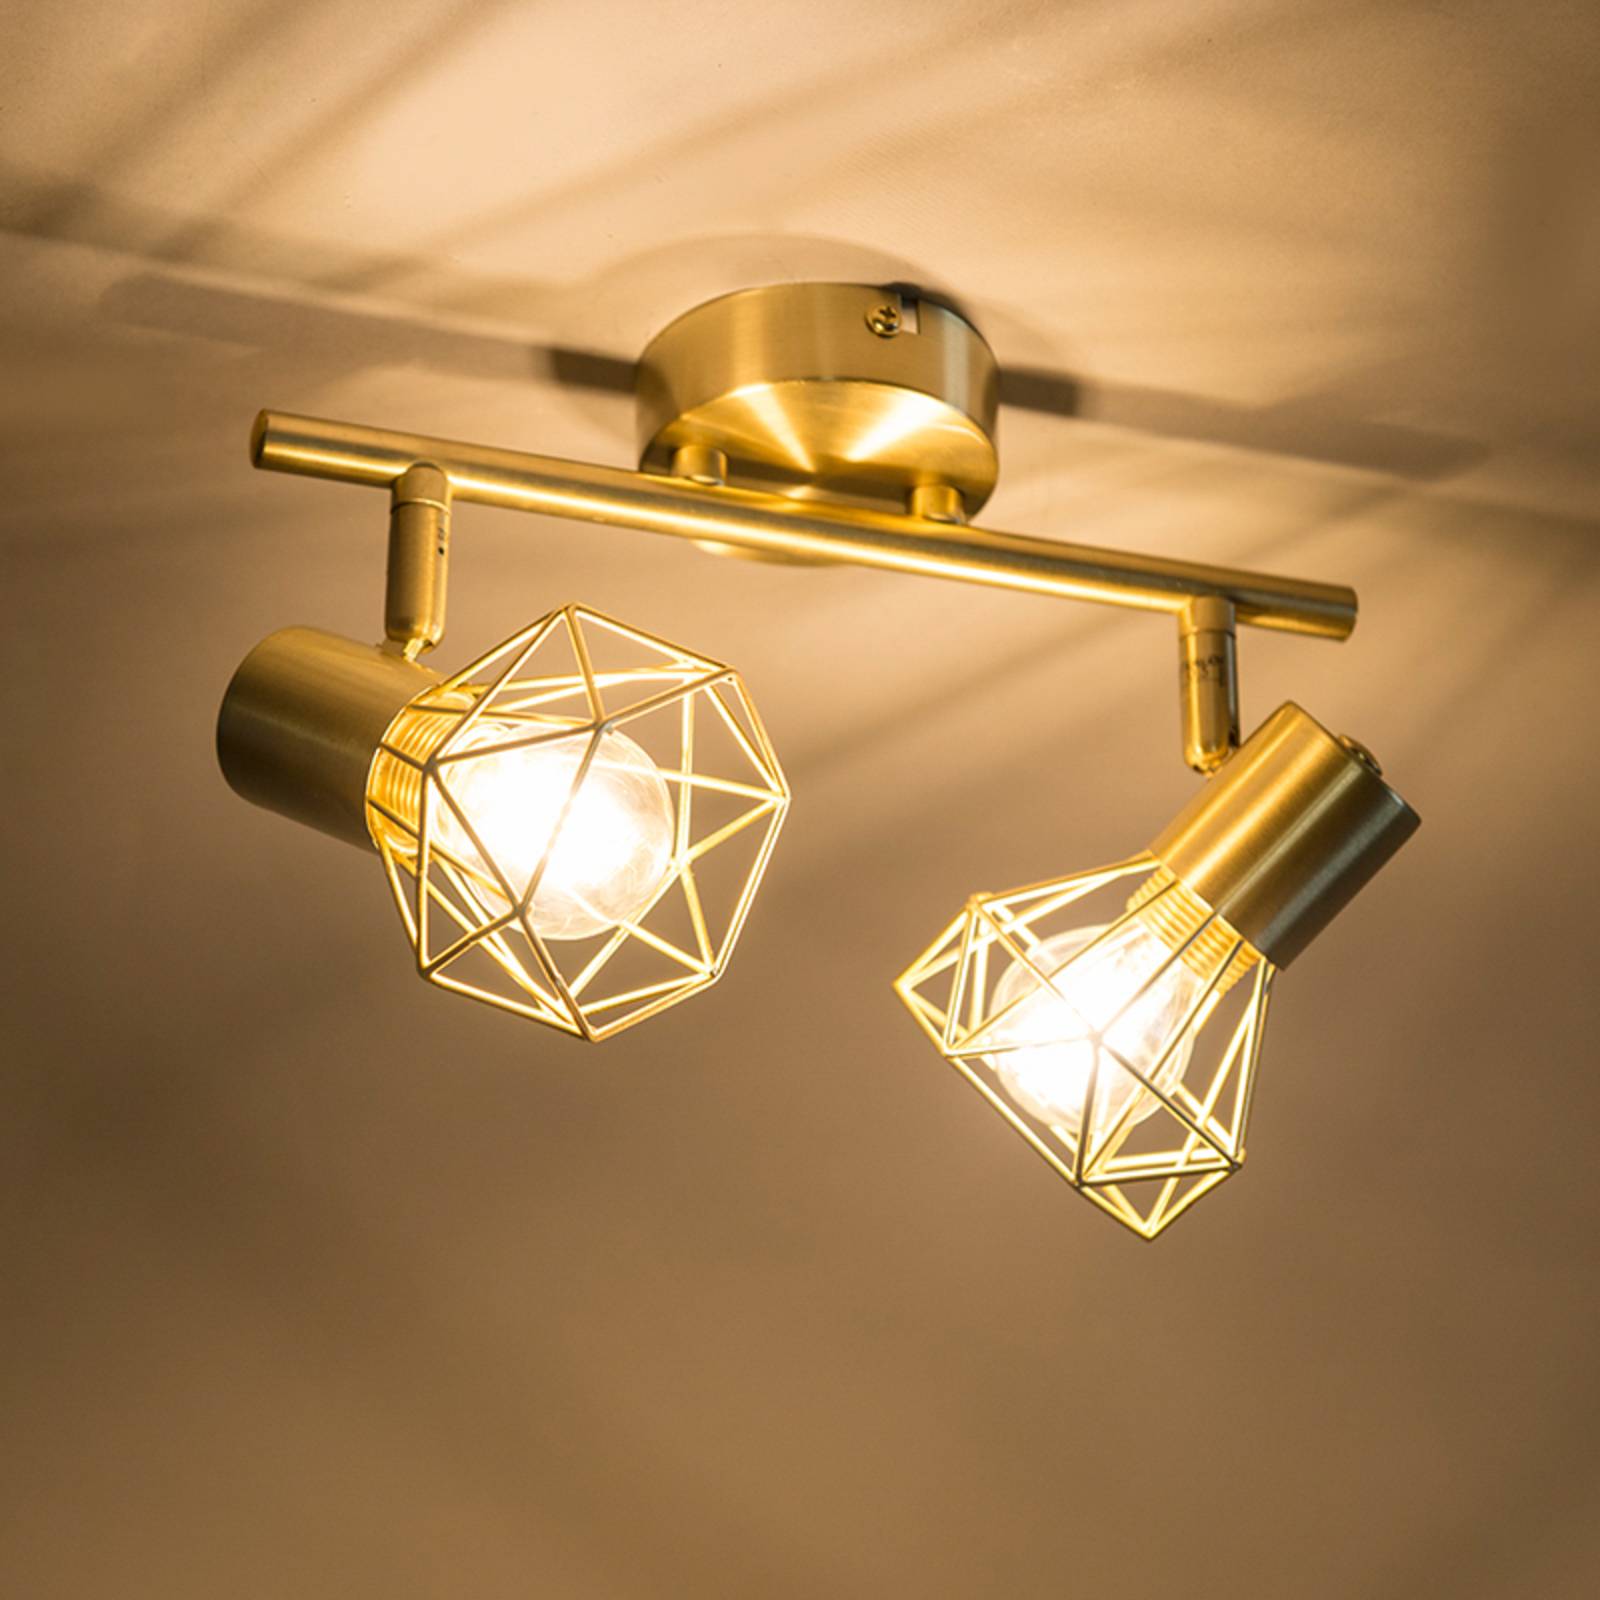 Photos - Chandelier / Lamp QAZQA Mosh cage ceiling light with 2 lampshades, brass 